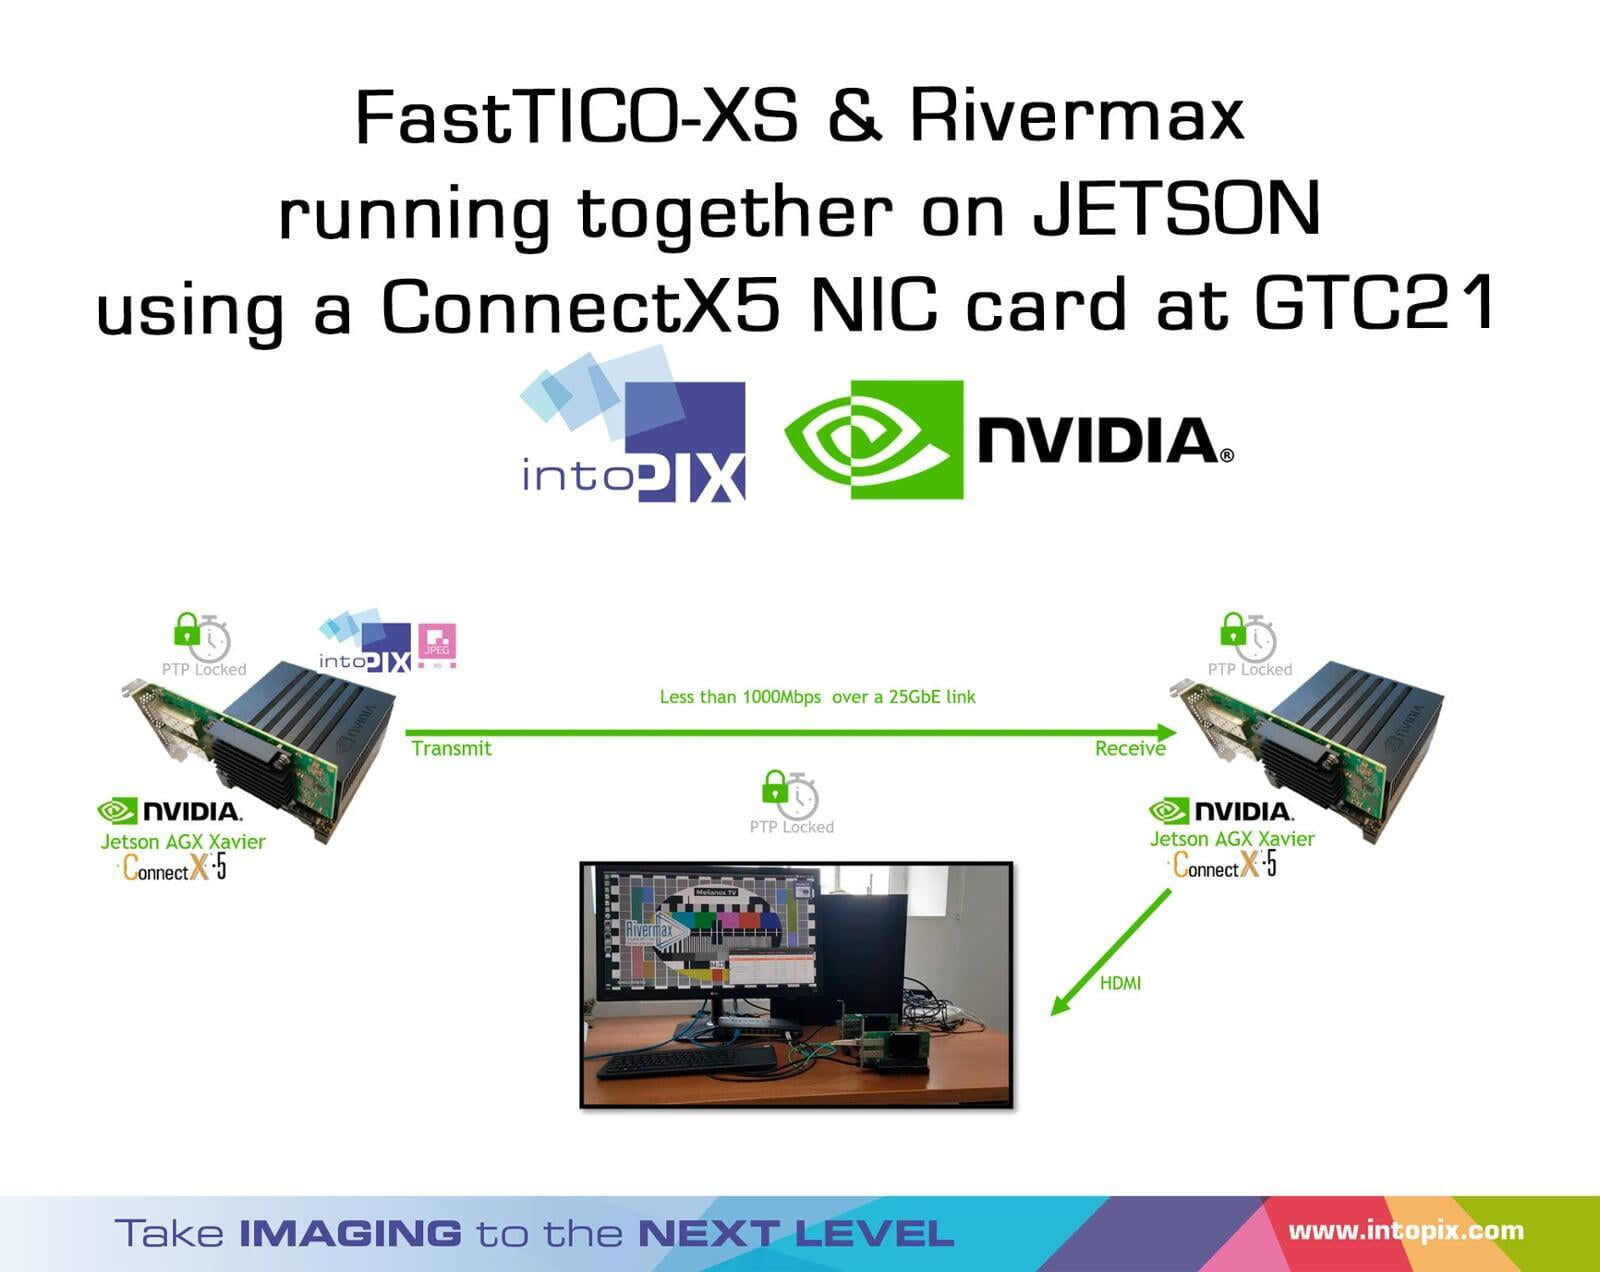 FastTICO-XS & Rivermax running together on JETSON using a ConnectX5 NIC card at GTC21